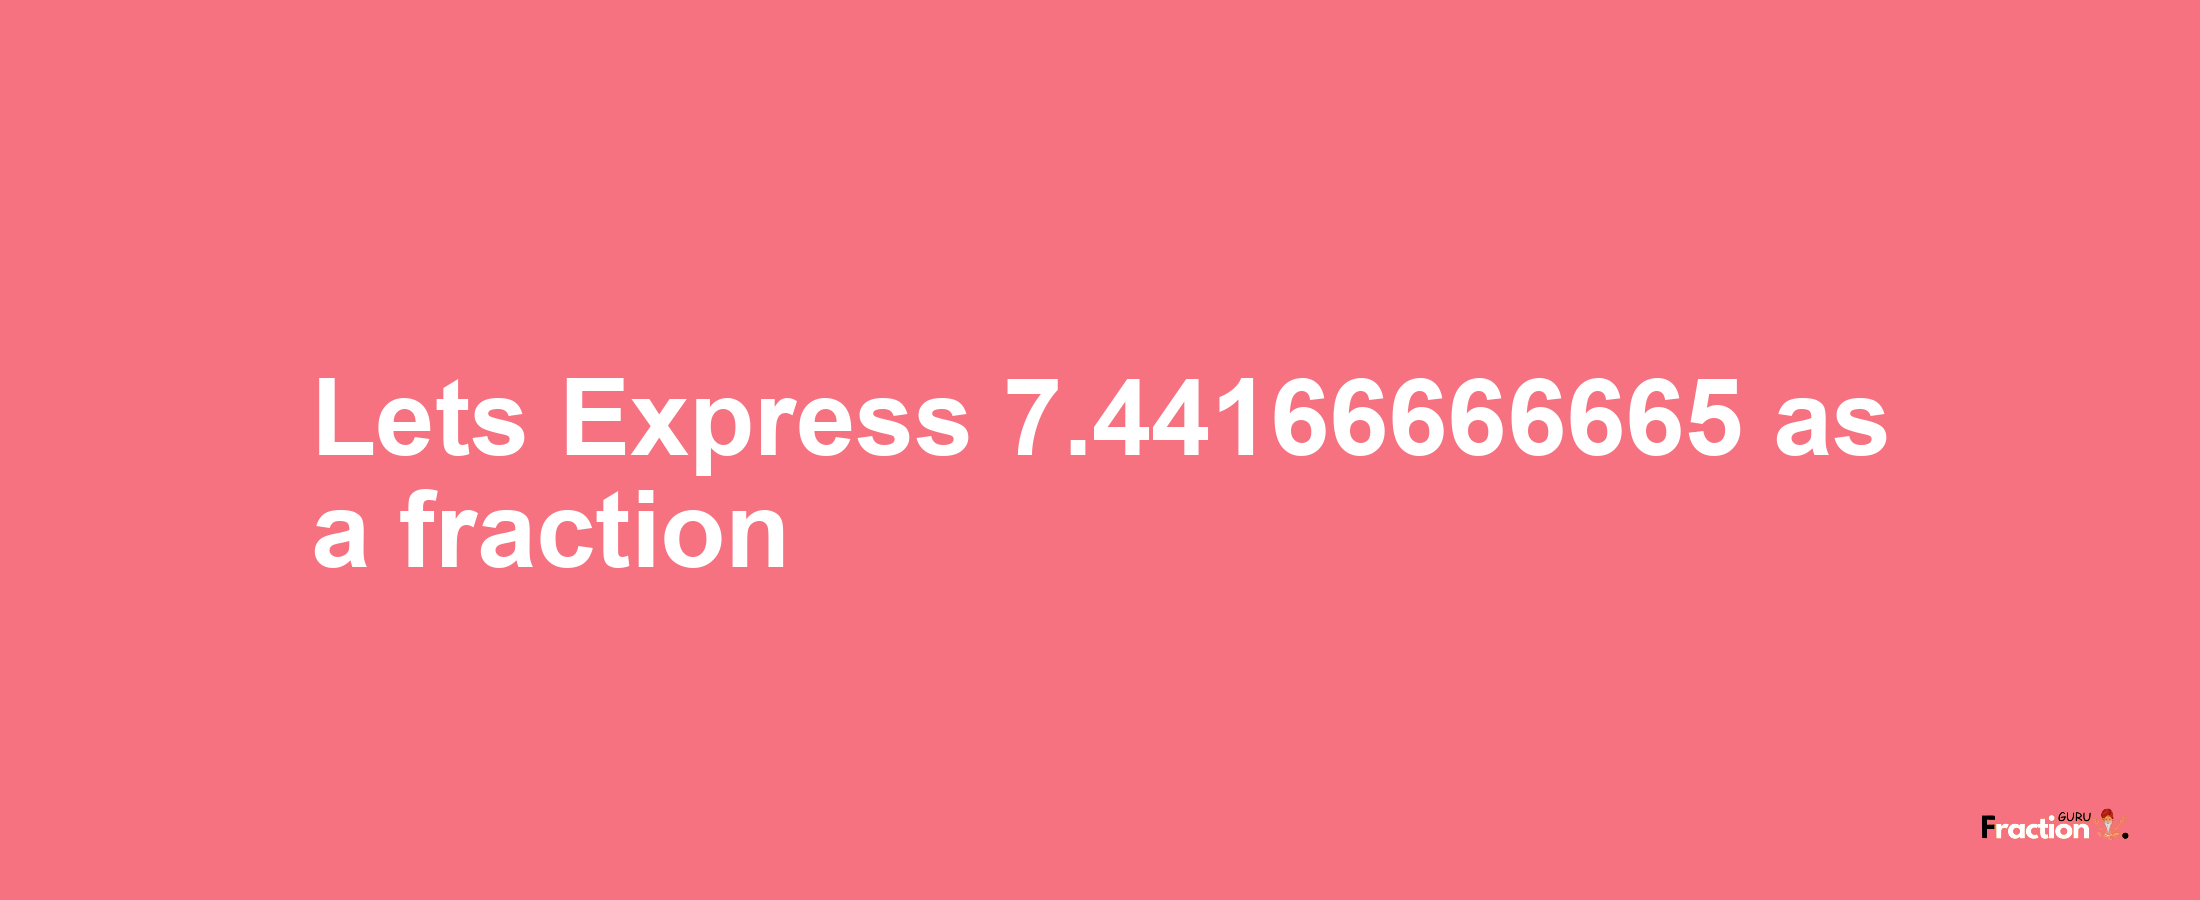 Lets Express 7.44166666665 as afraction